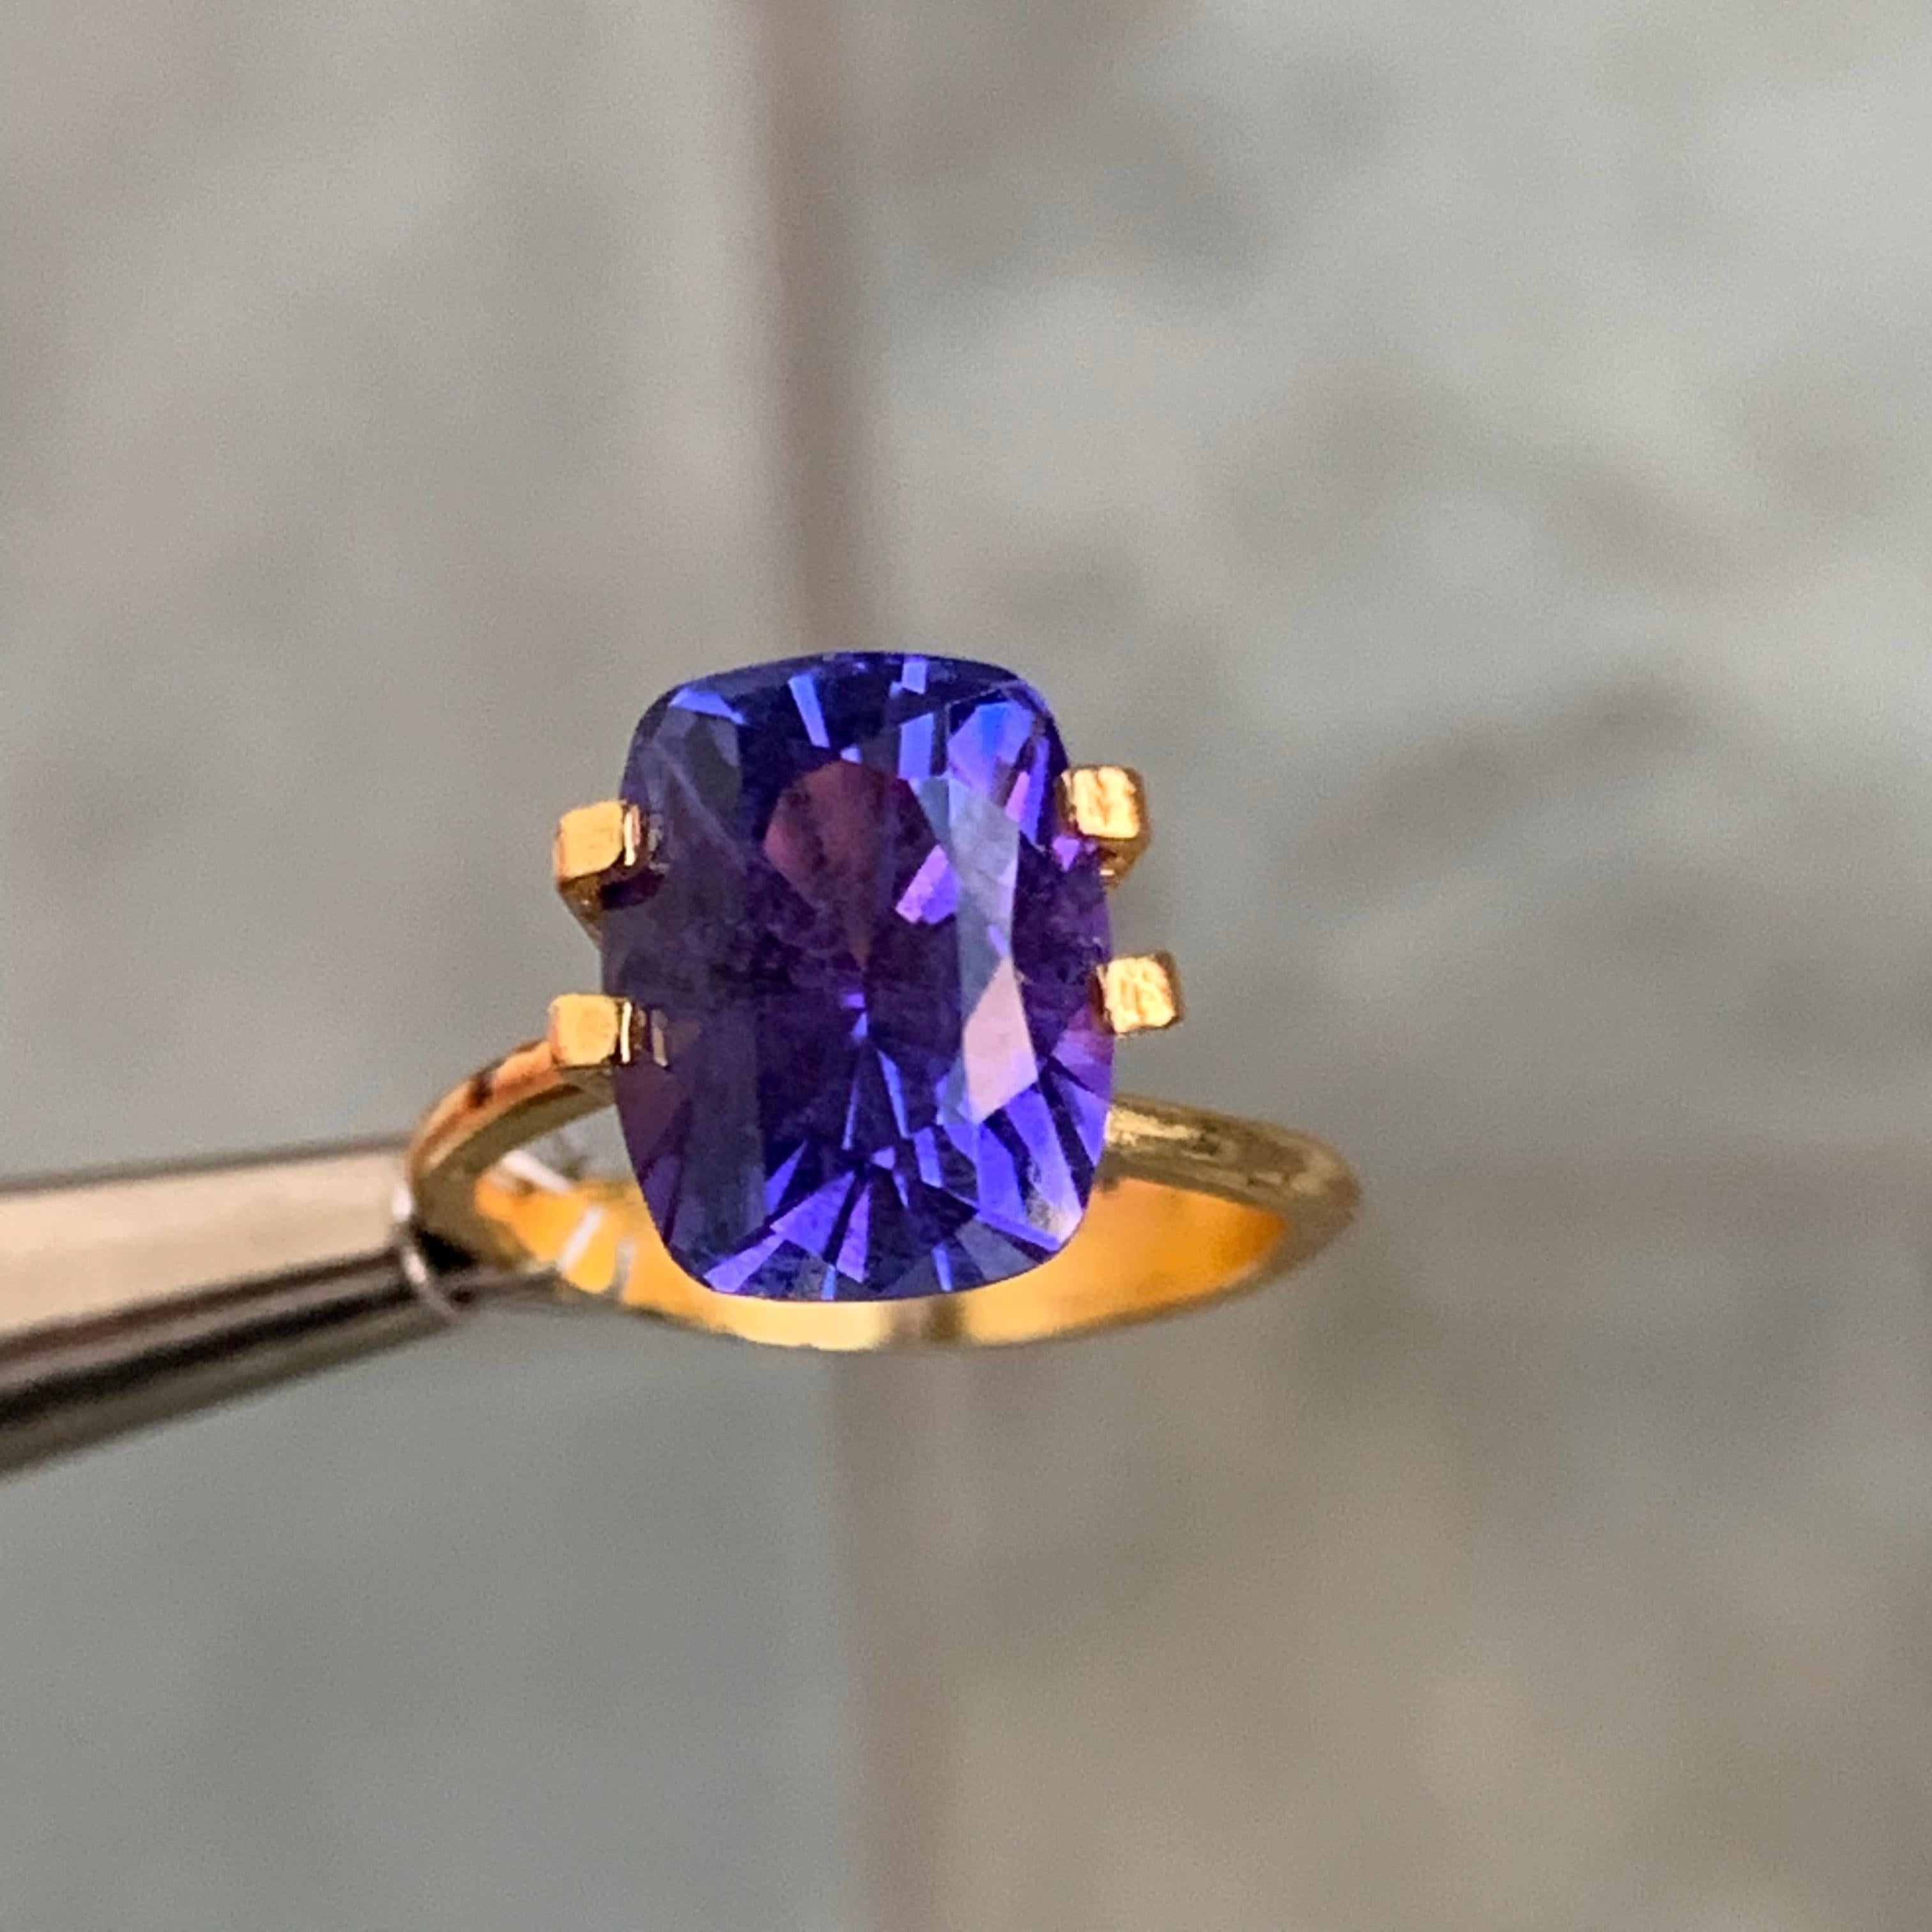 5.25 Carat Tanzanite Loose Gemstone

Can be made for any finger size , pendant , ect..., this will be made to order and take approximately 2-4 weeks from customers final design approval. If you need a sooner date let us know and we will see if we